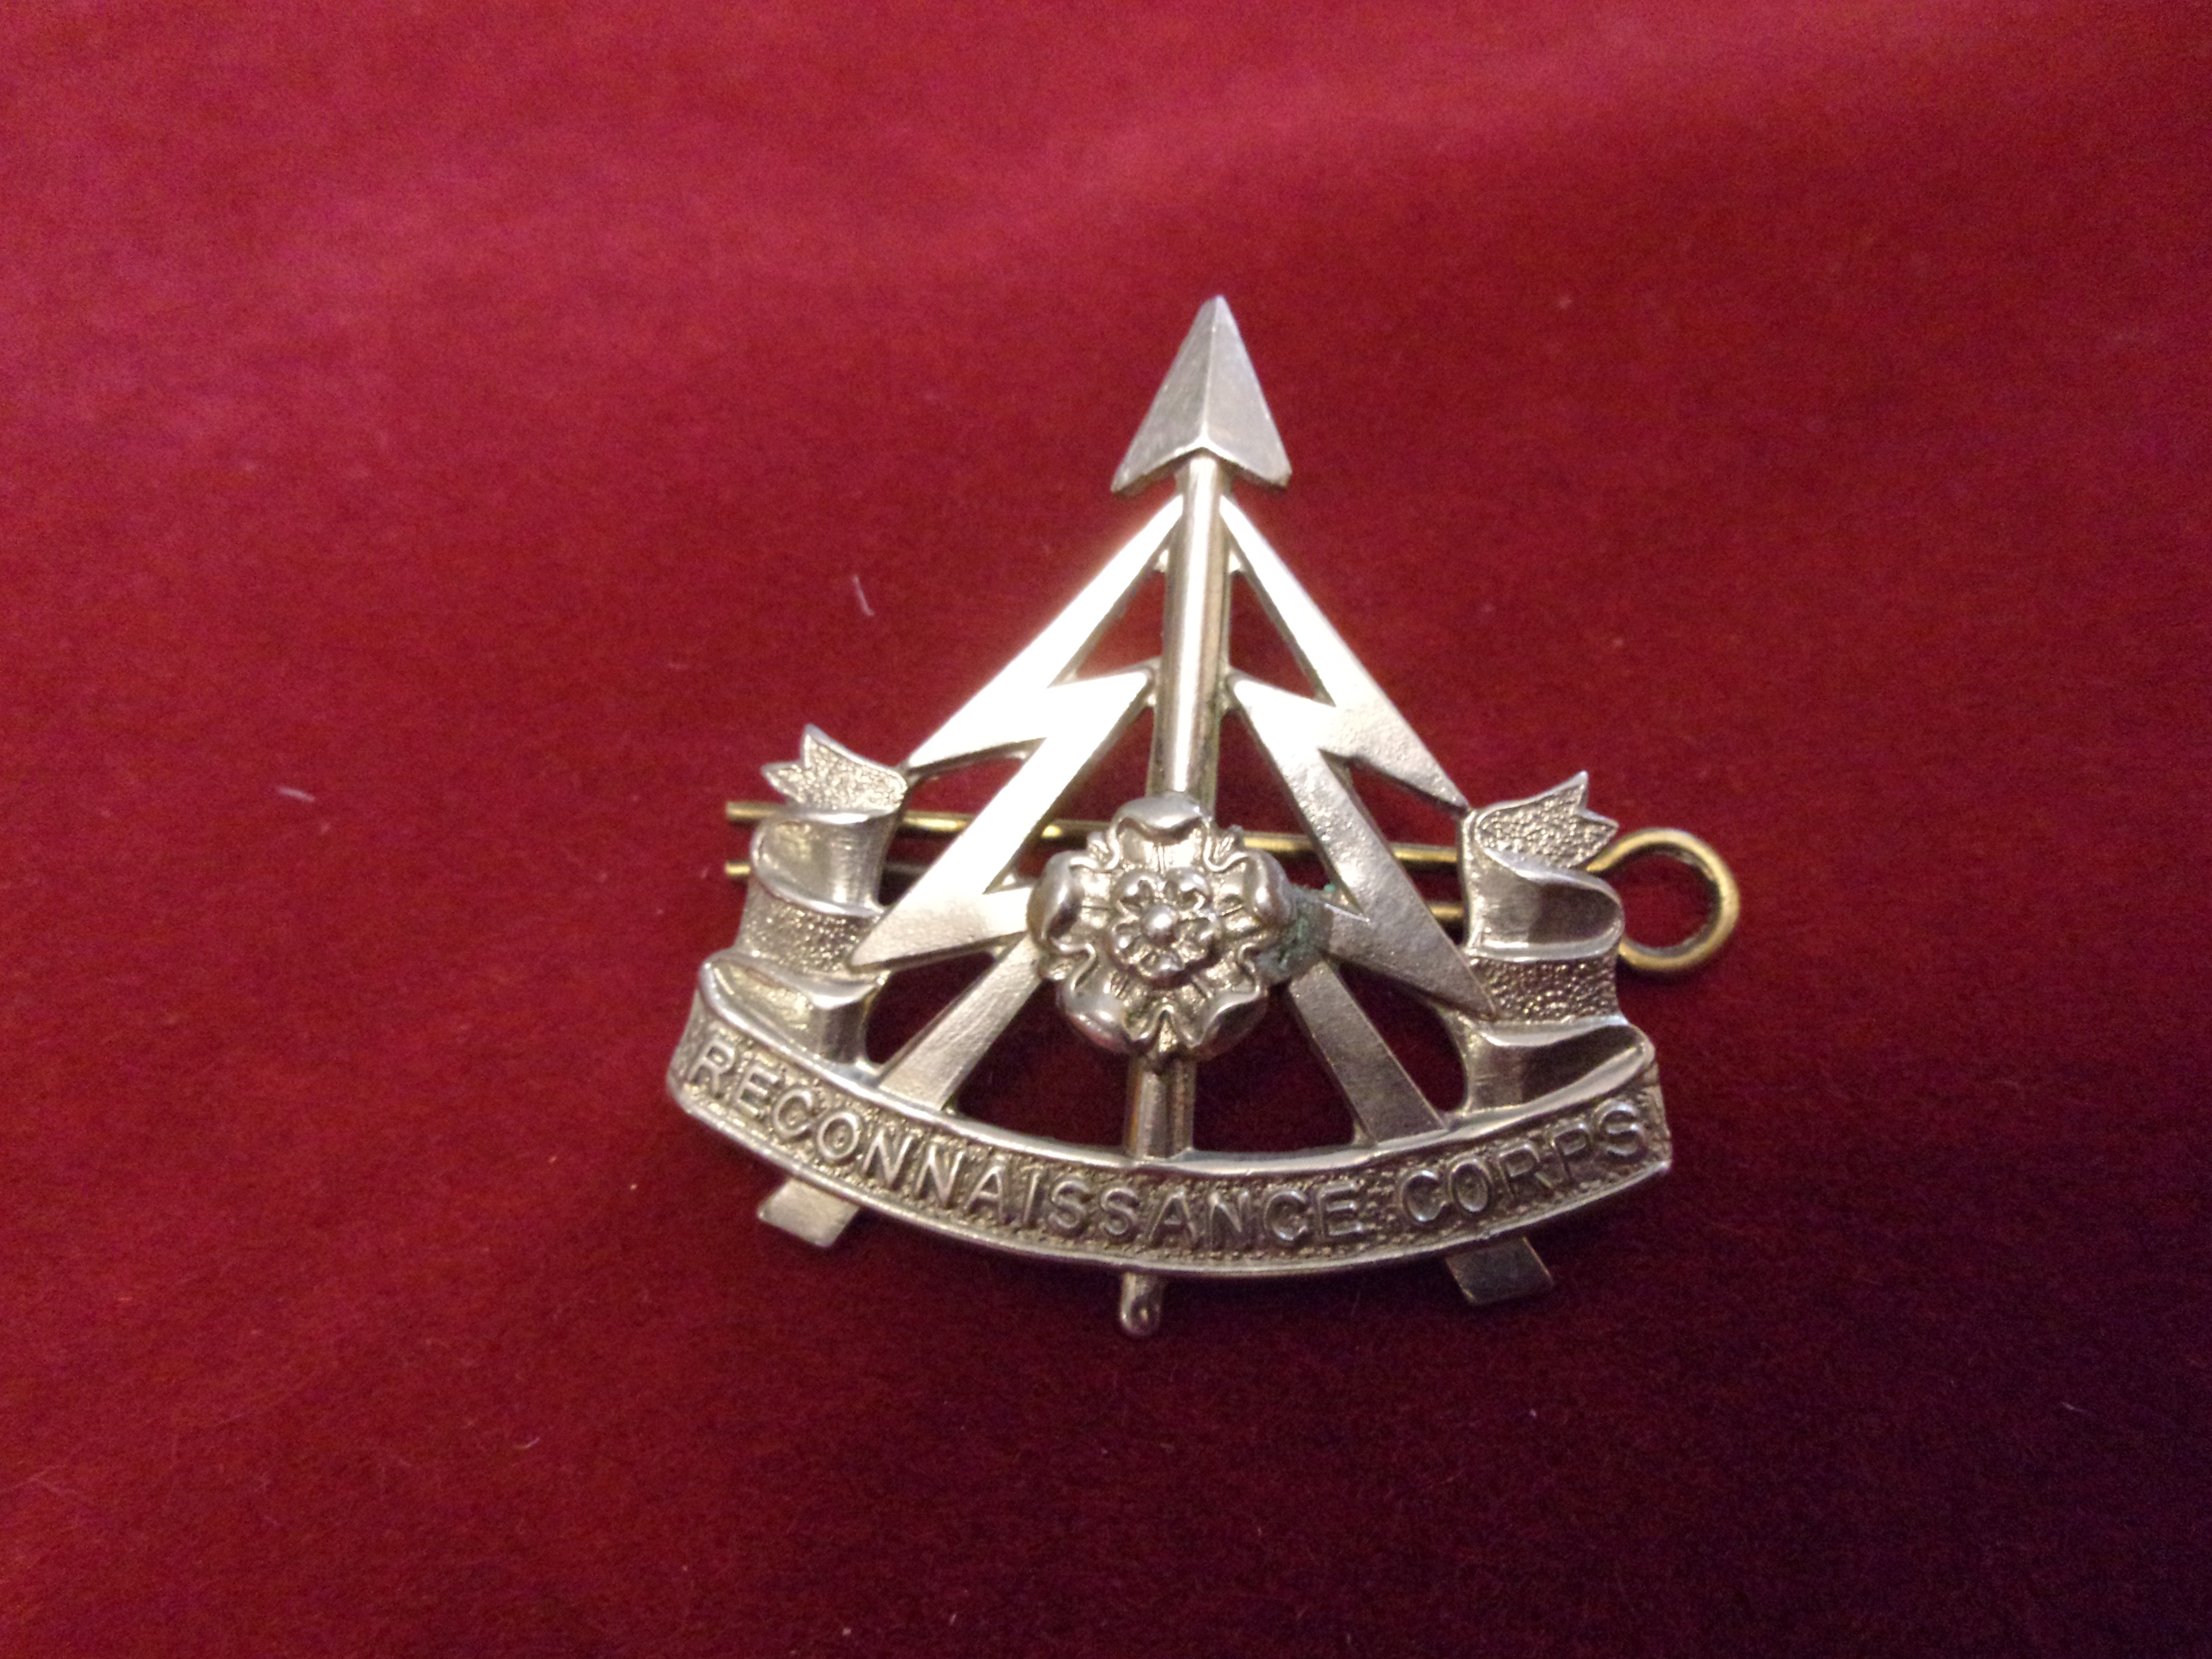 49th Reconnaissance Regiment WWII Officers Cap Badge (White-metal), two lugs. Issued between 1942-